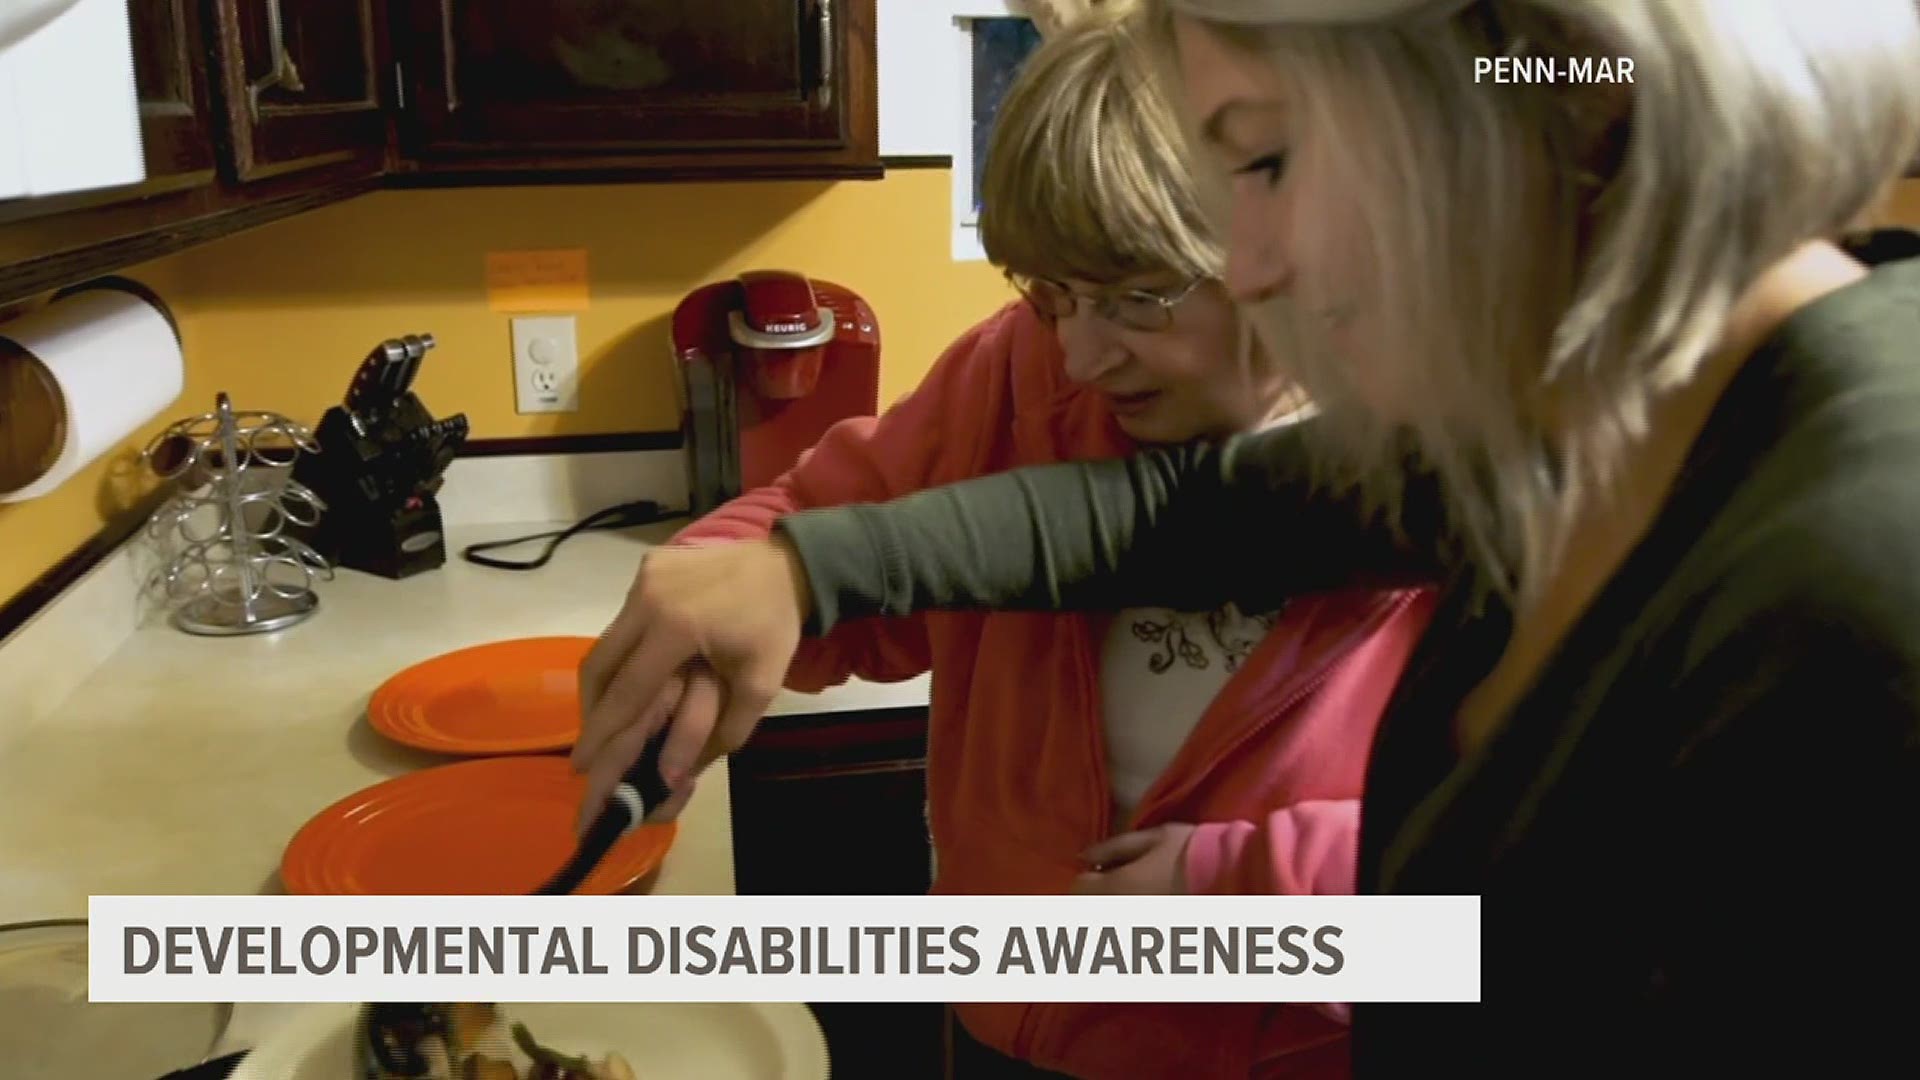 A local mother shares the challenges her daughter faces living with an intellectual and developmental disability.